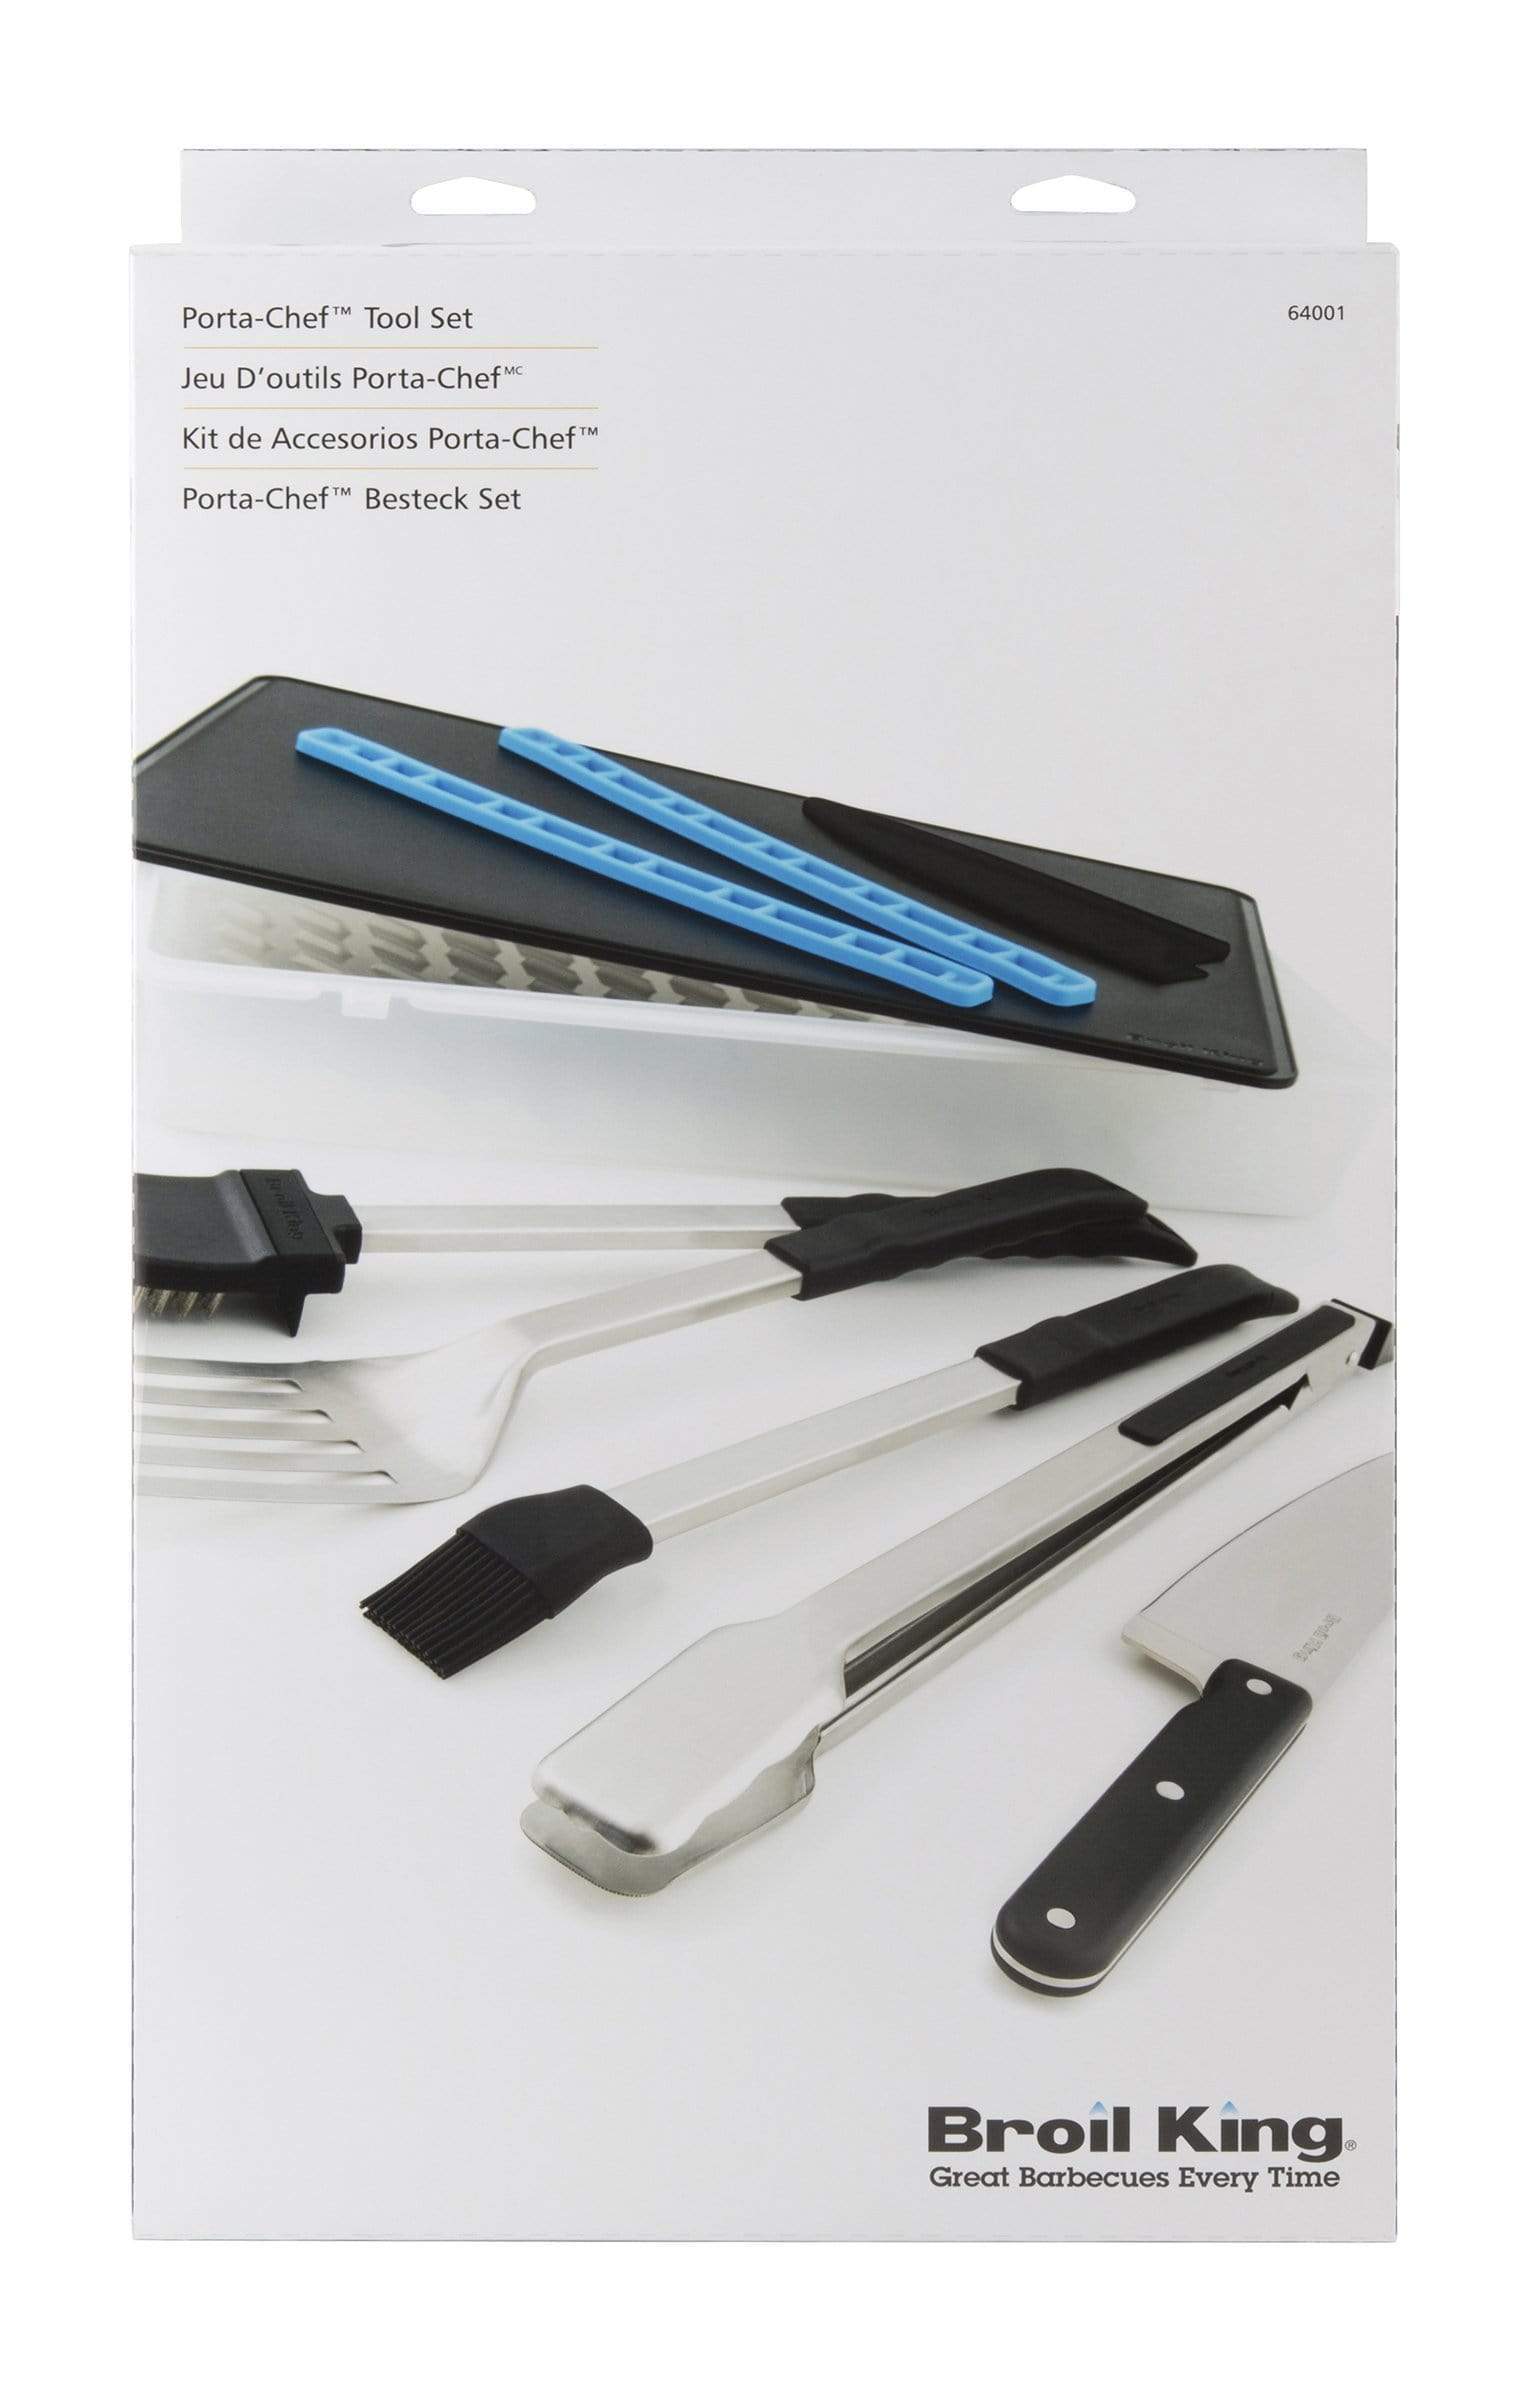 Broil King Broil King Accessories TOOL SET - PORTA-CHEF - SS